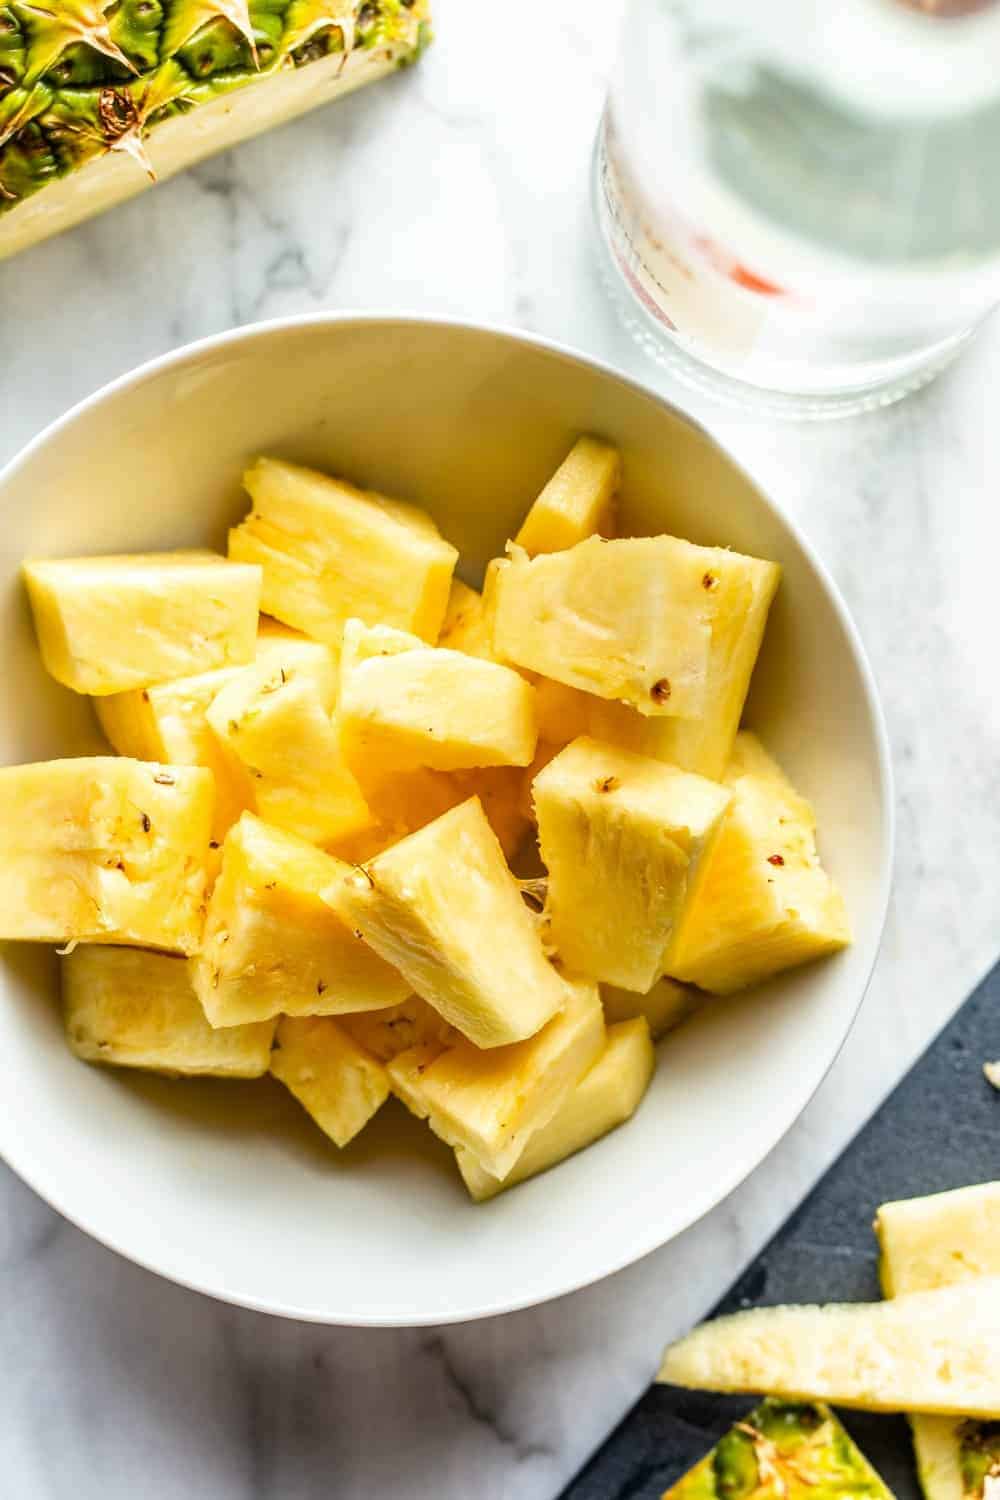 Diced pineapple in a white bowl